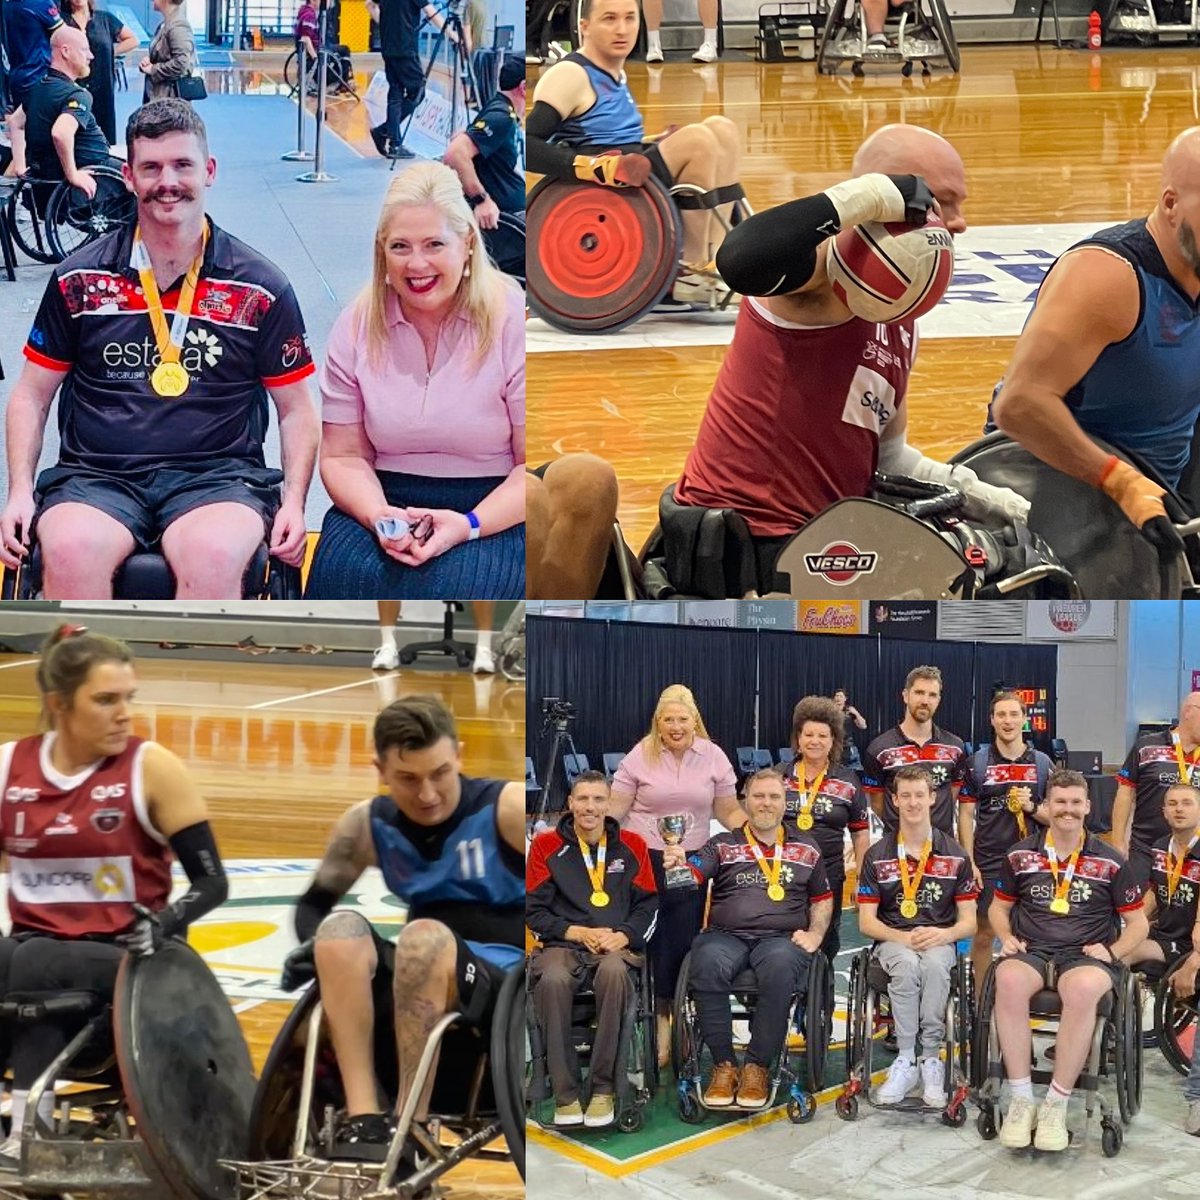 WOW! Thanks to every Wheelchair Rugby Nationals Champs’ player for enthralling SA with your remarkable skill & courage! Congrats SA Sharks on Div 2 gold & NSW Gladiators on Div 1 win Thanks all who support these magnificent athletes & made champs happen - so proud SA is host